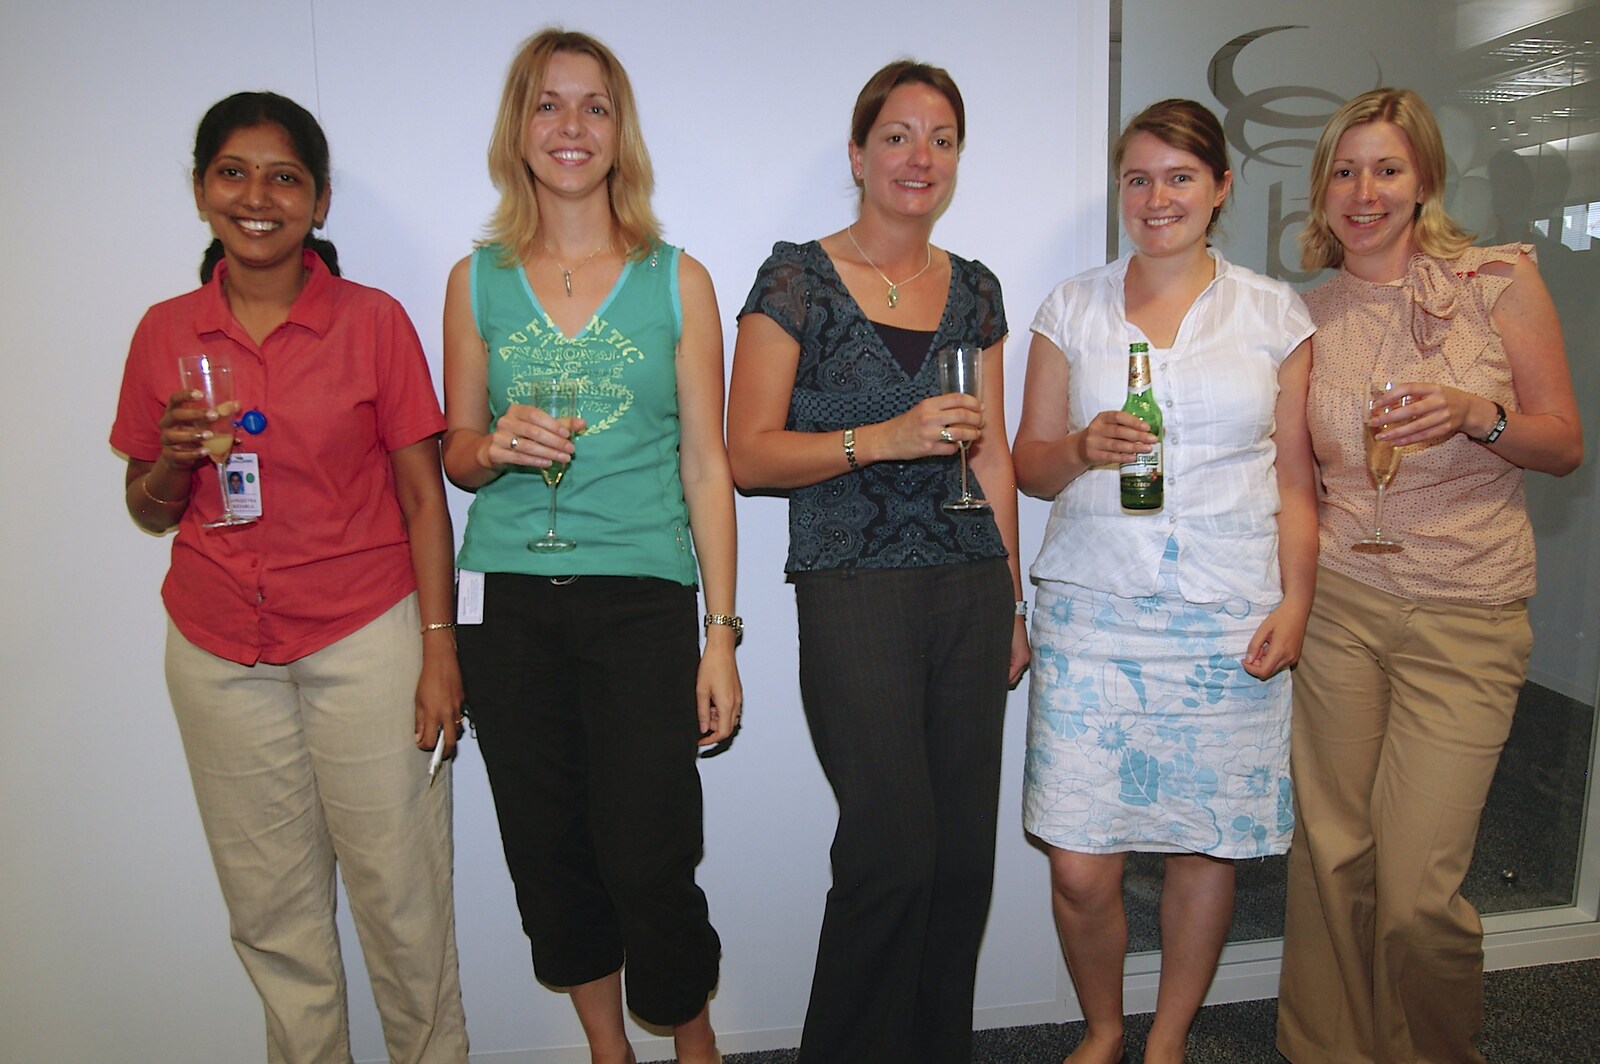 Sangheetha, Janet, Zoe, Isobel, Lucy - the 5k gang from Qualcomm's New Office Party, Science Park, Milton Road, Cambridge - 3rd July 2006